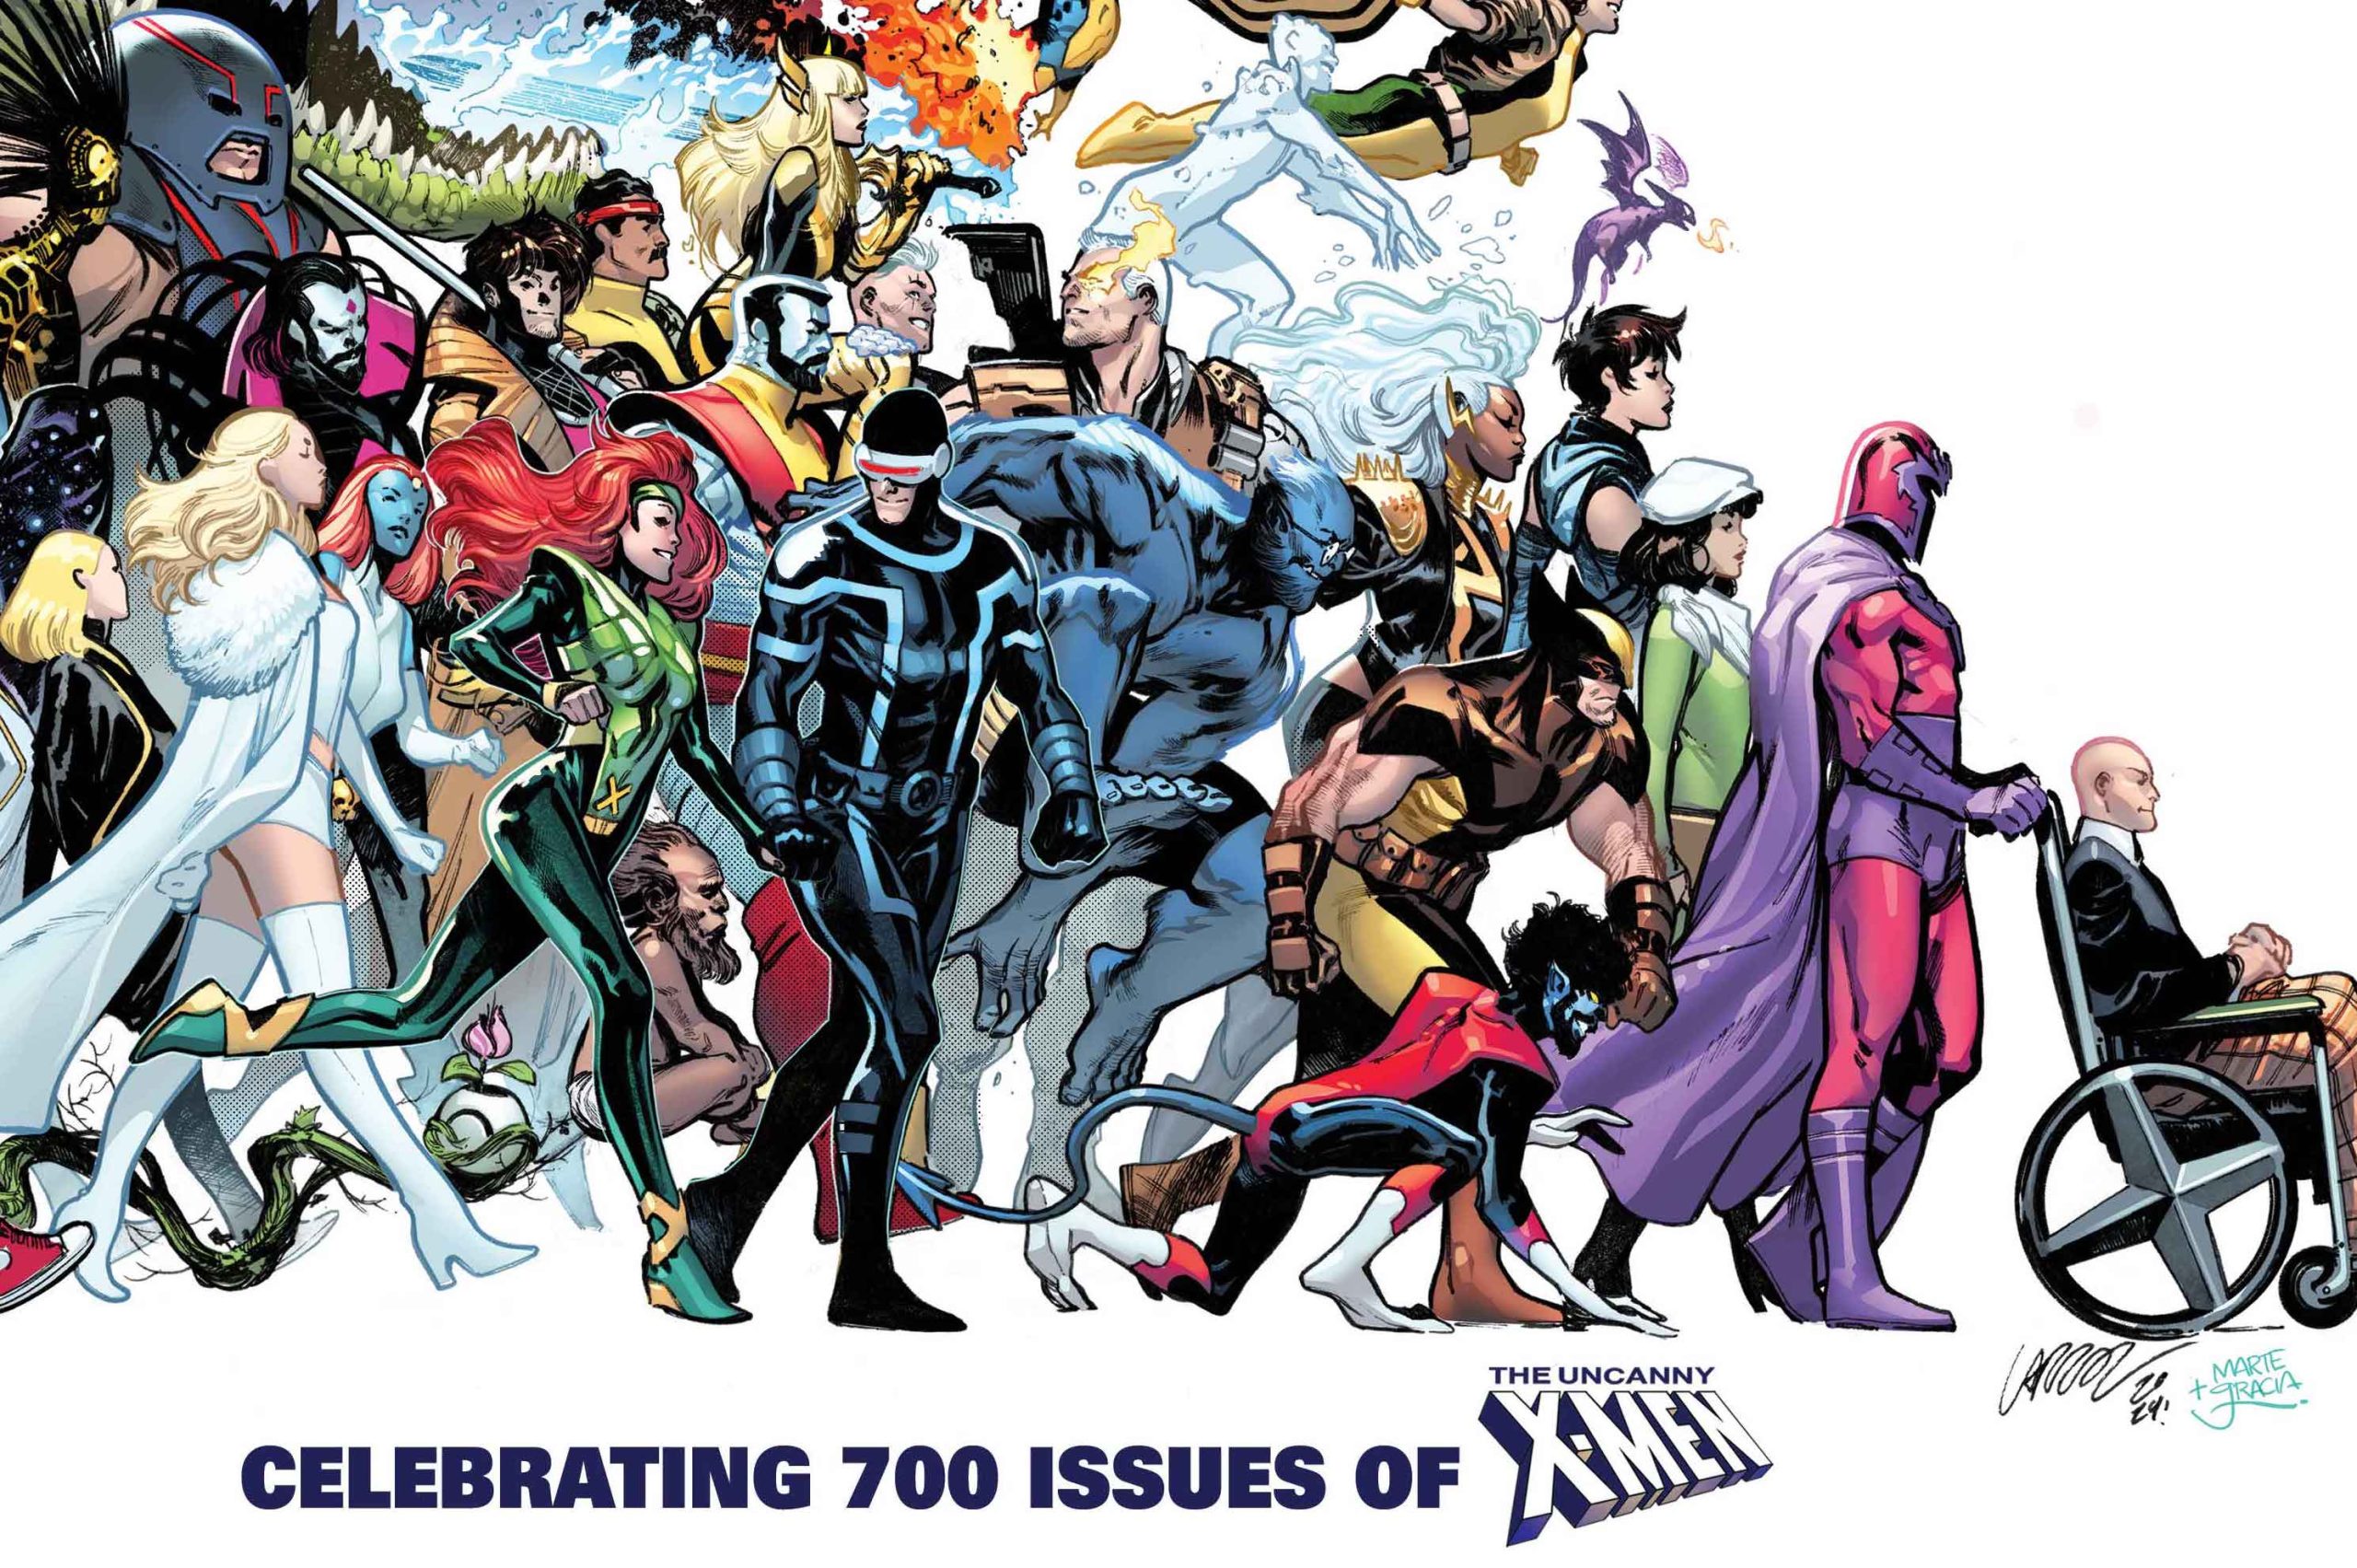 'X-Men' #35 (LGY #700) is the final farewell to the Krakoan Age